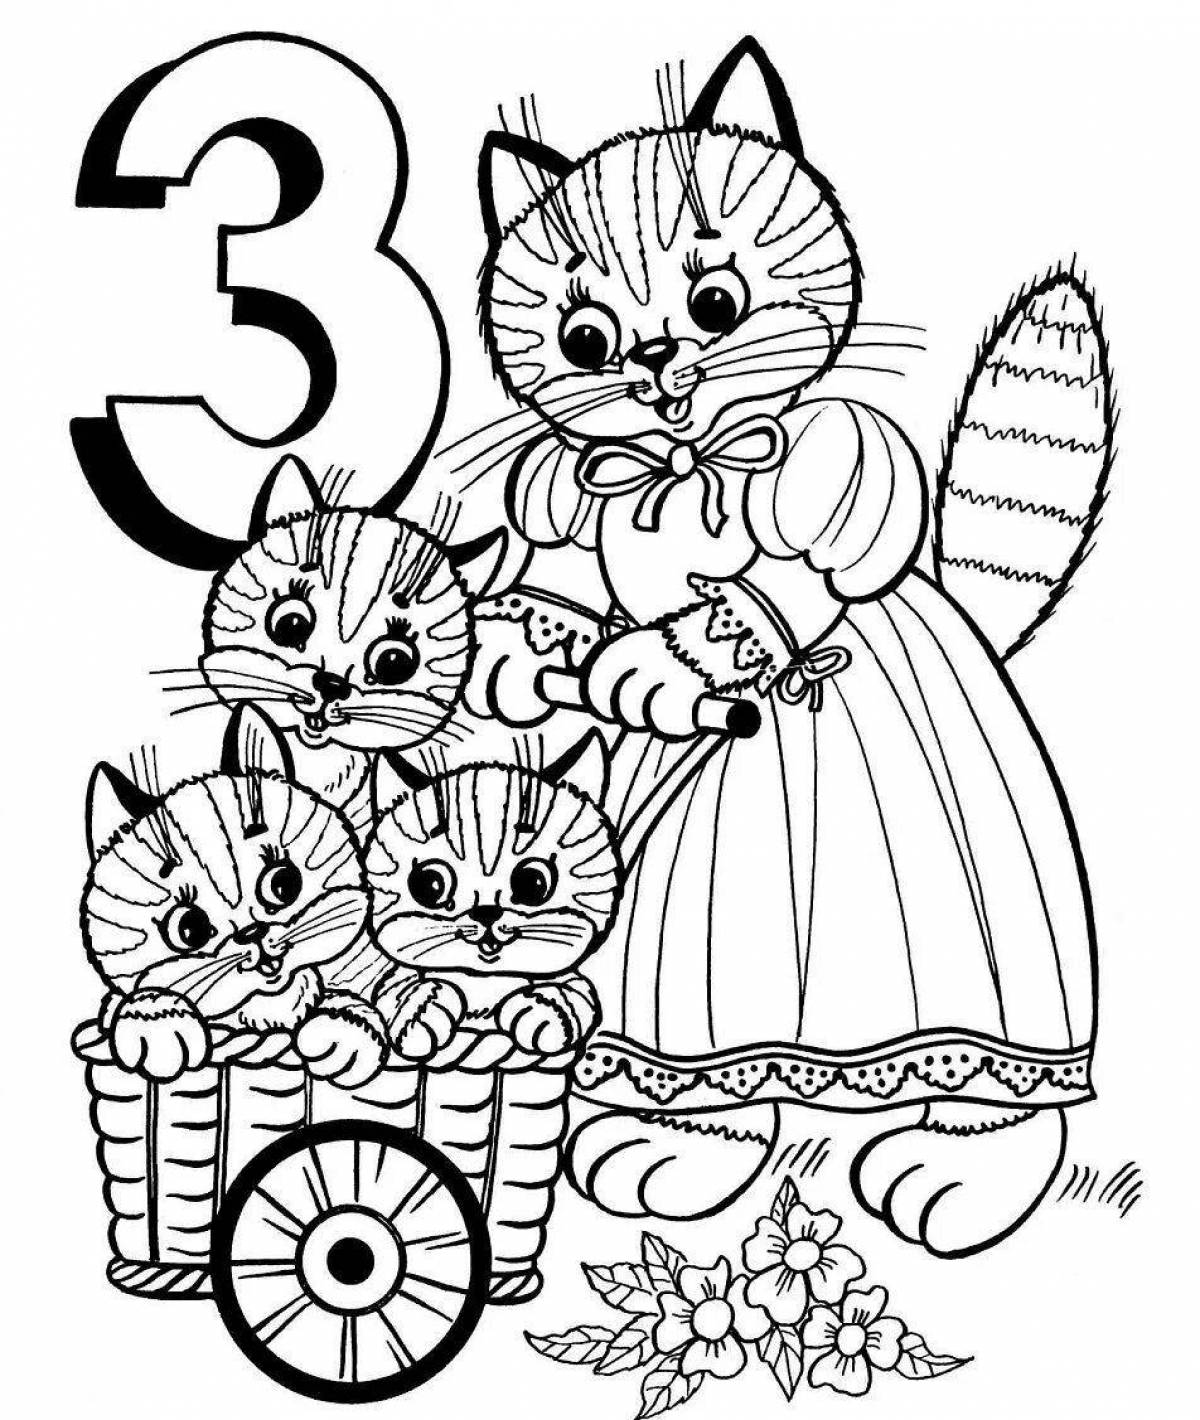 Unforgettable pre-k cat house coloring page